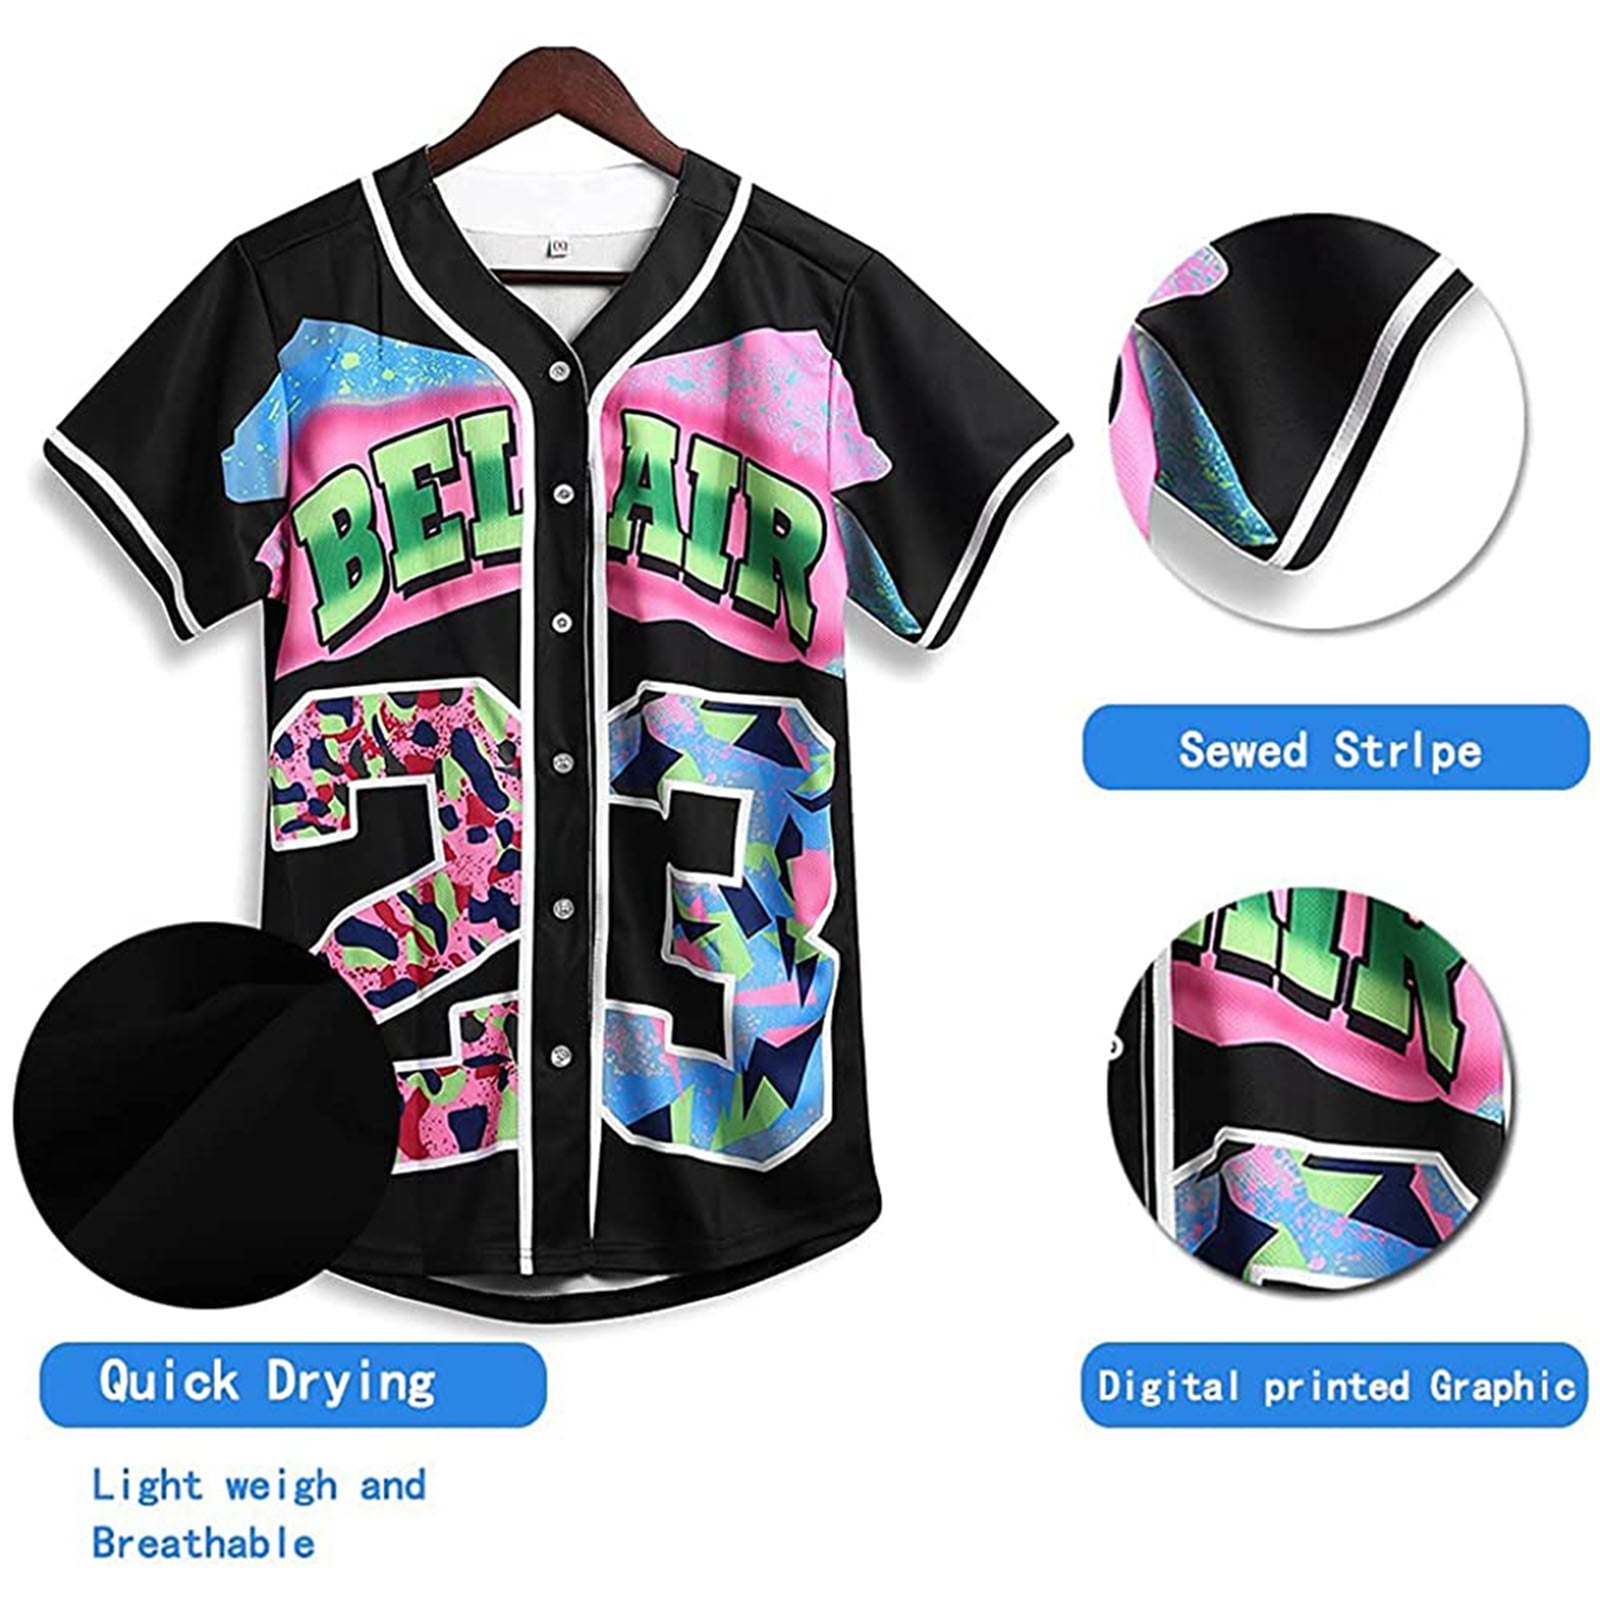  Baseball Jerseys 90s 80s Retro Shirts, Unisex Short Sleeve Baseball  Shirts, Hip Hop Outfit, Button Down Sports Uniforms for Party, Club and Pub  I011C-Yellow-M : Sports & Outdoors